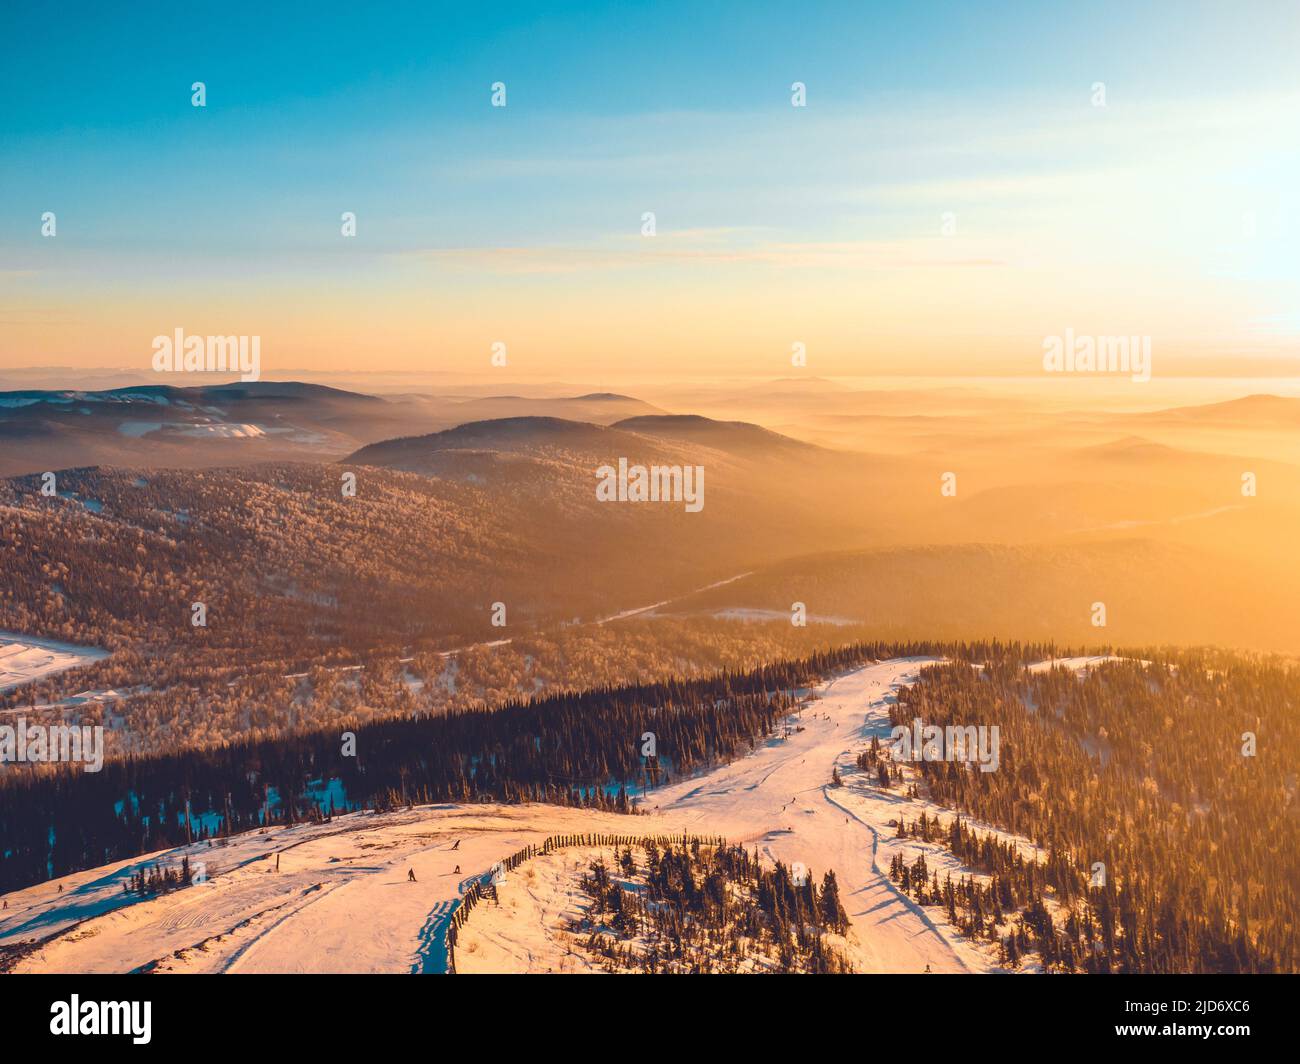 Ski slope in a mountainous area in the forest at sunset, aerial view. Skiers and snowboarders roll down the mountain with stunning views of nature. Stock Photo